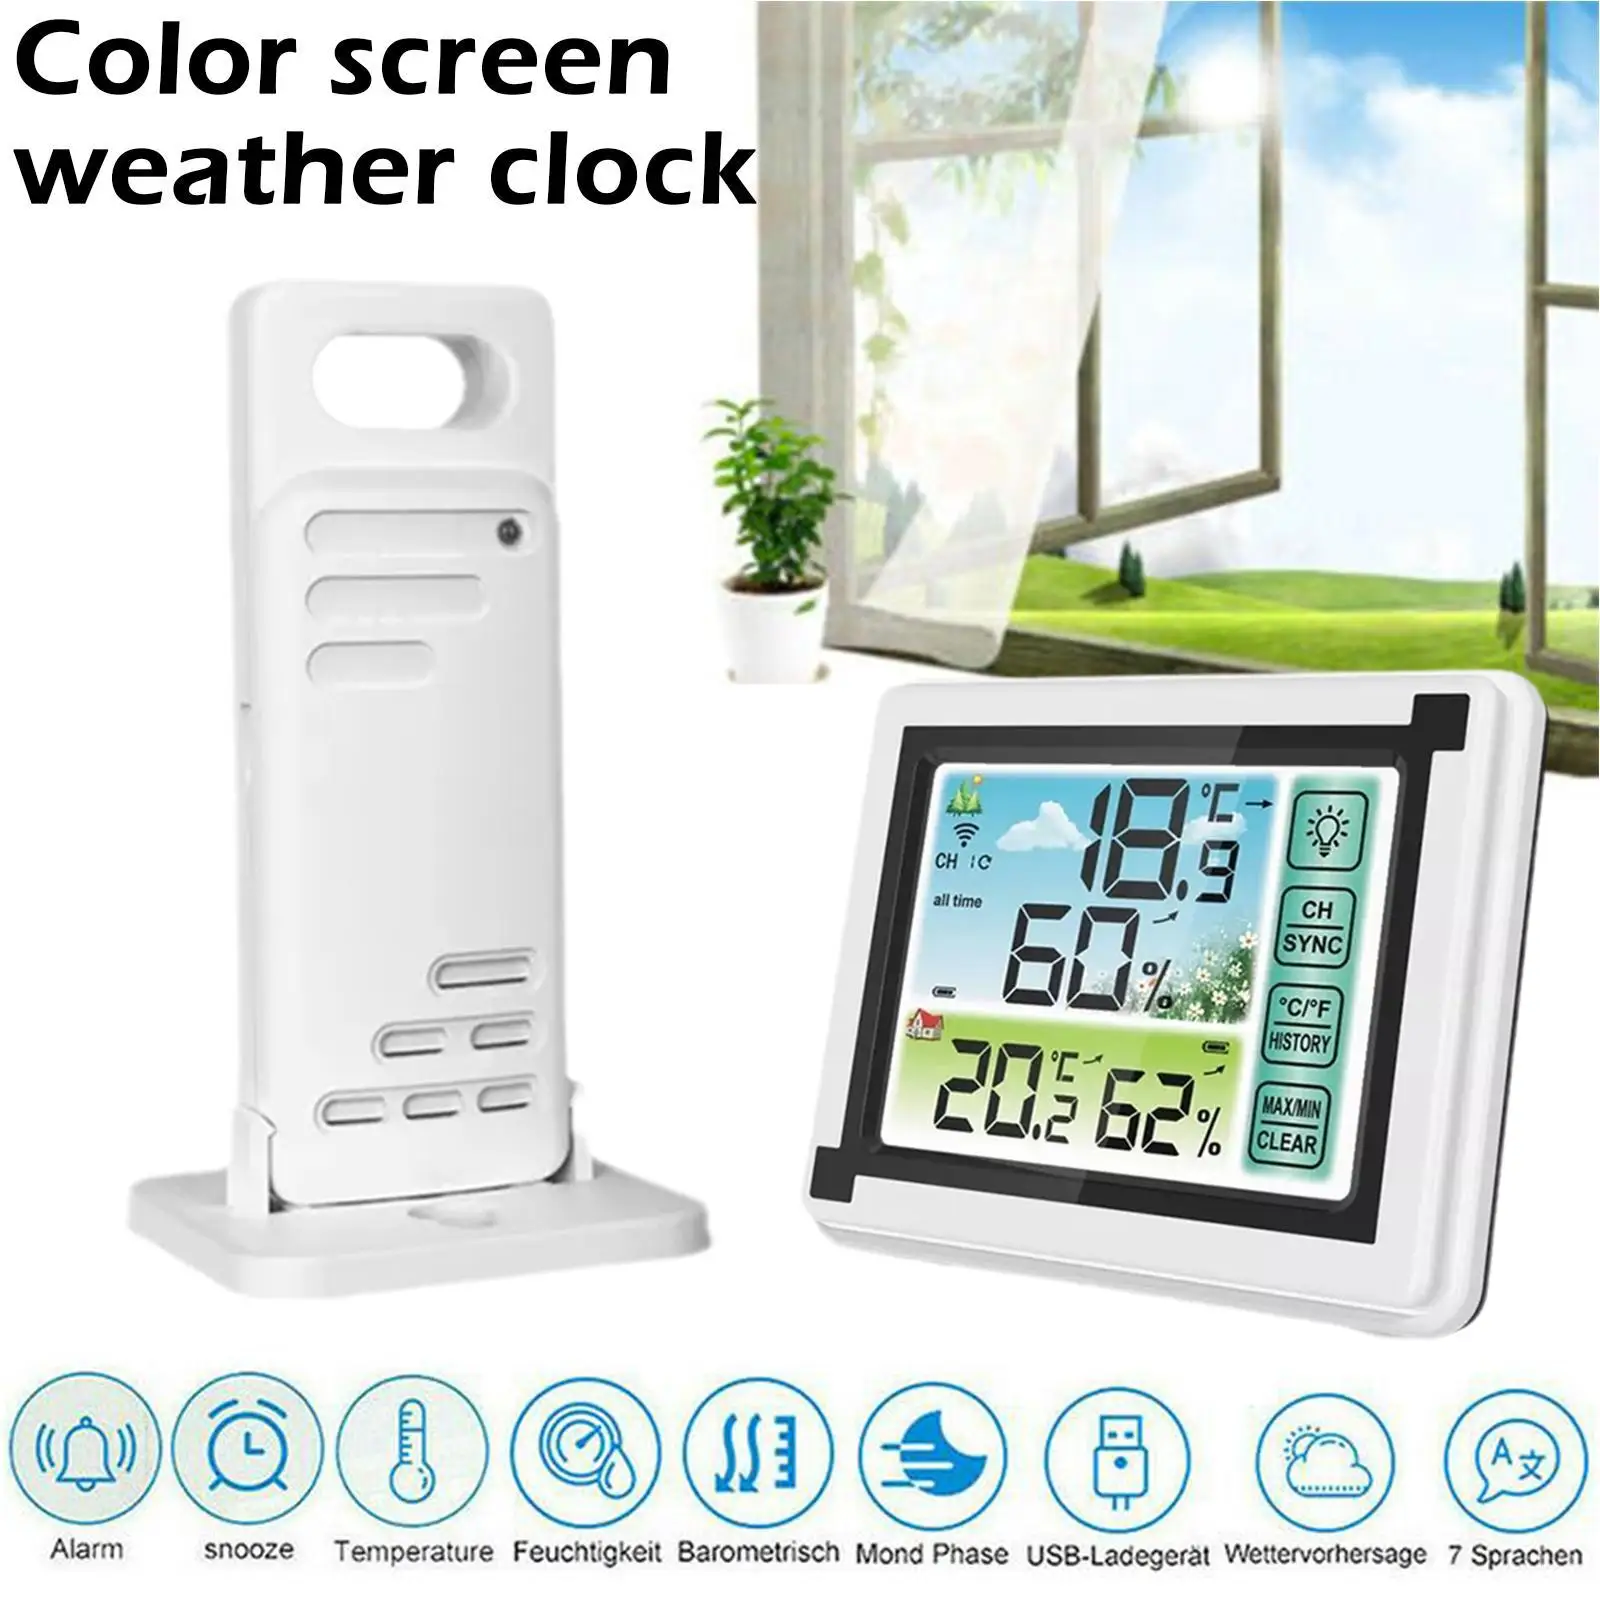 

Indoor Wireless Thermometer Large Colorful Screen Temperature And Humidity Monitor Weather Station Clock Measuring Tools